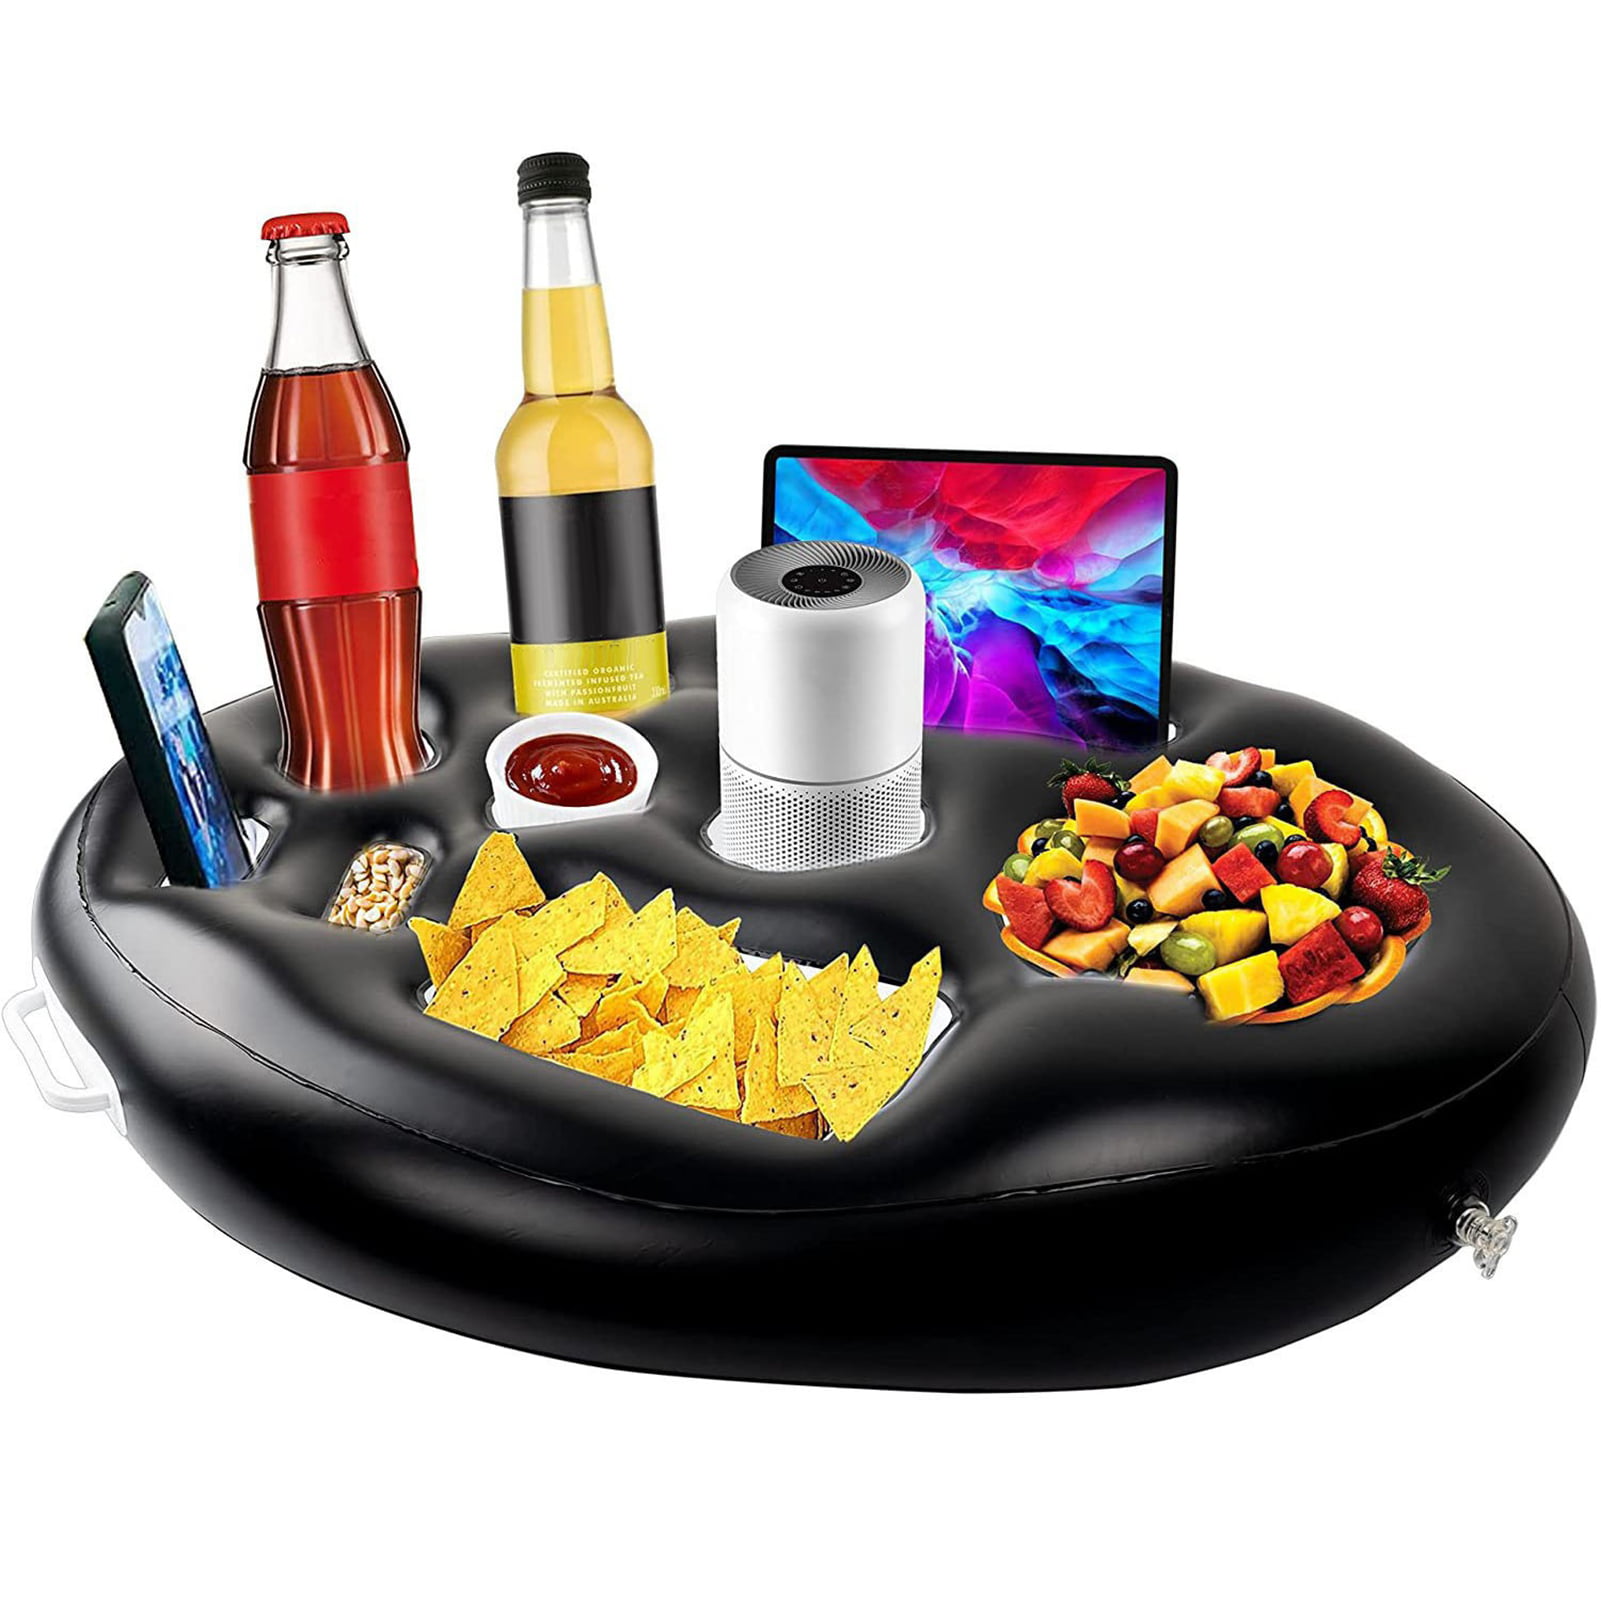 Dropship 2pc PVC Beverage Holder, Pool Float Food Drink Fruit Storage Pool  Float, Inflatable Floating Drink Holder Floating Tray For Summer Beach Pool  Party to Sell Online at a Lower Price